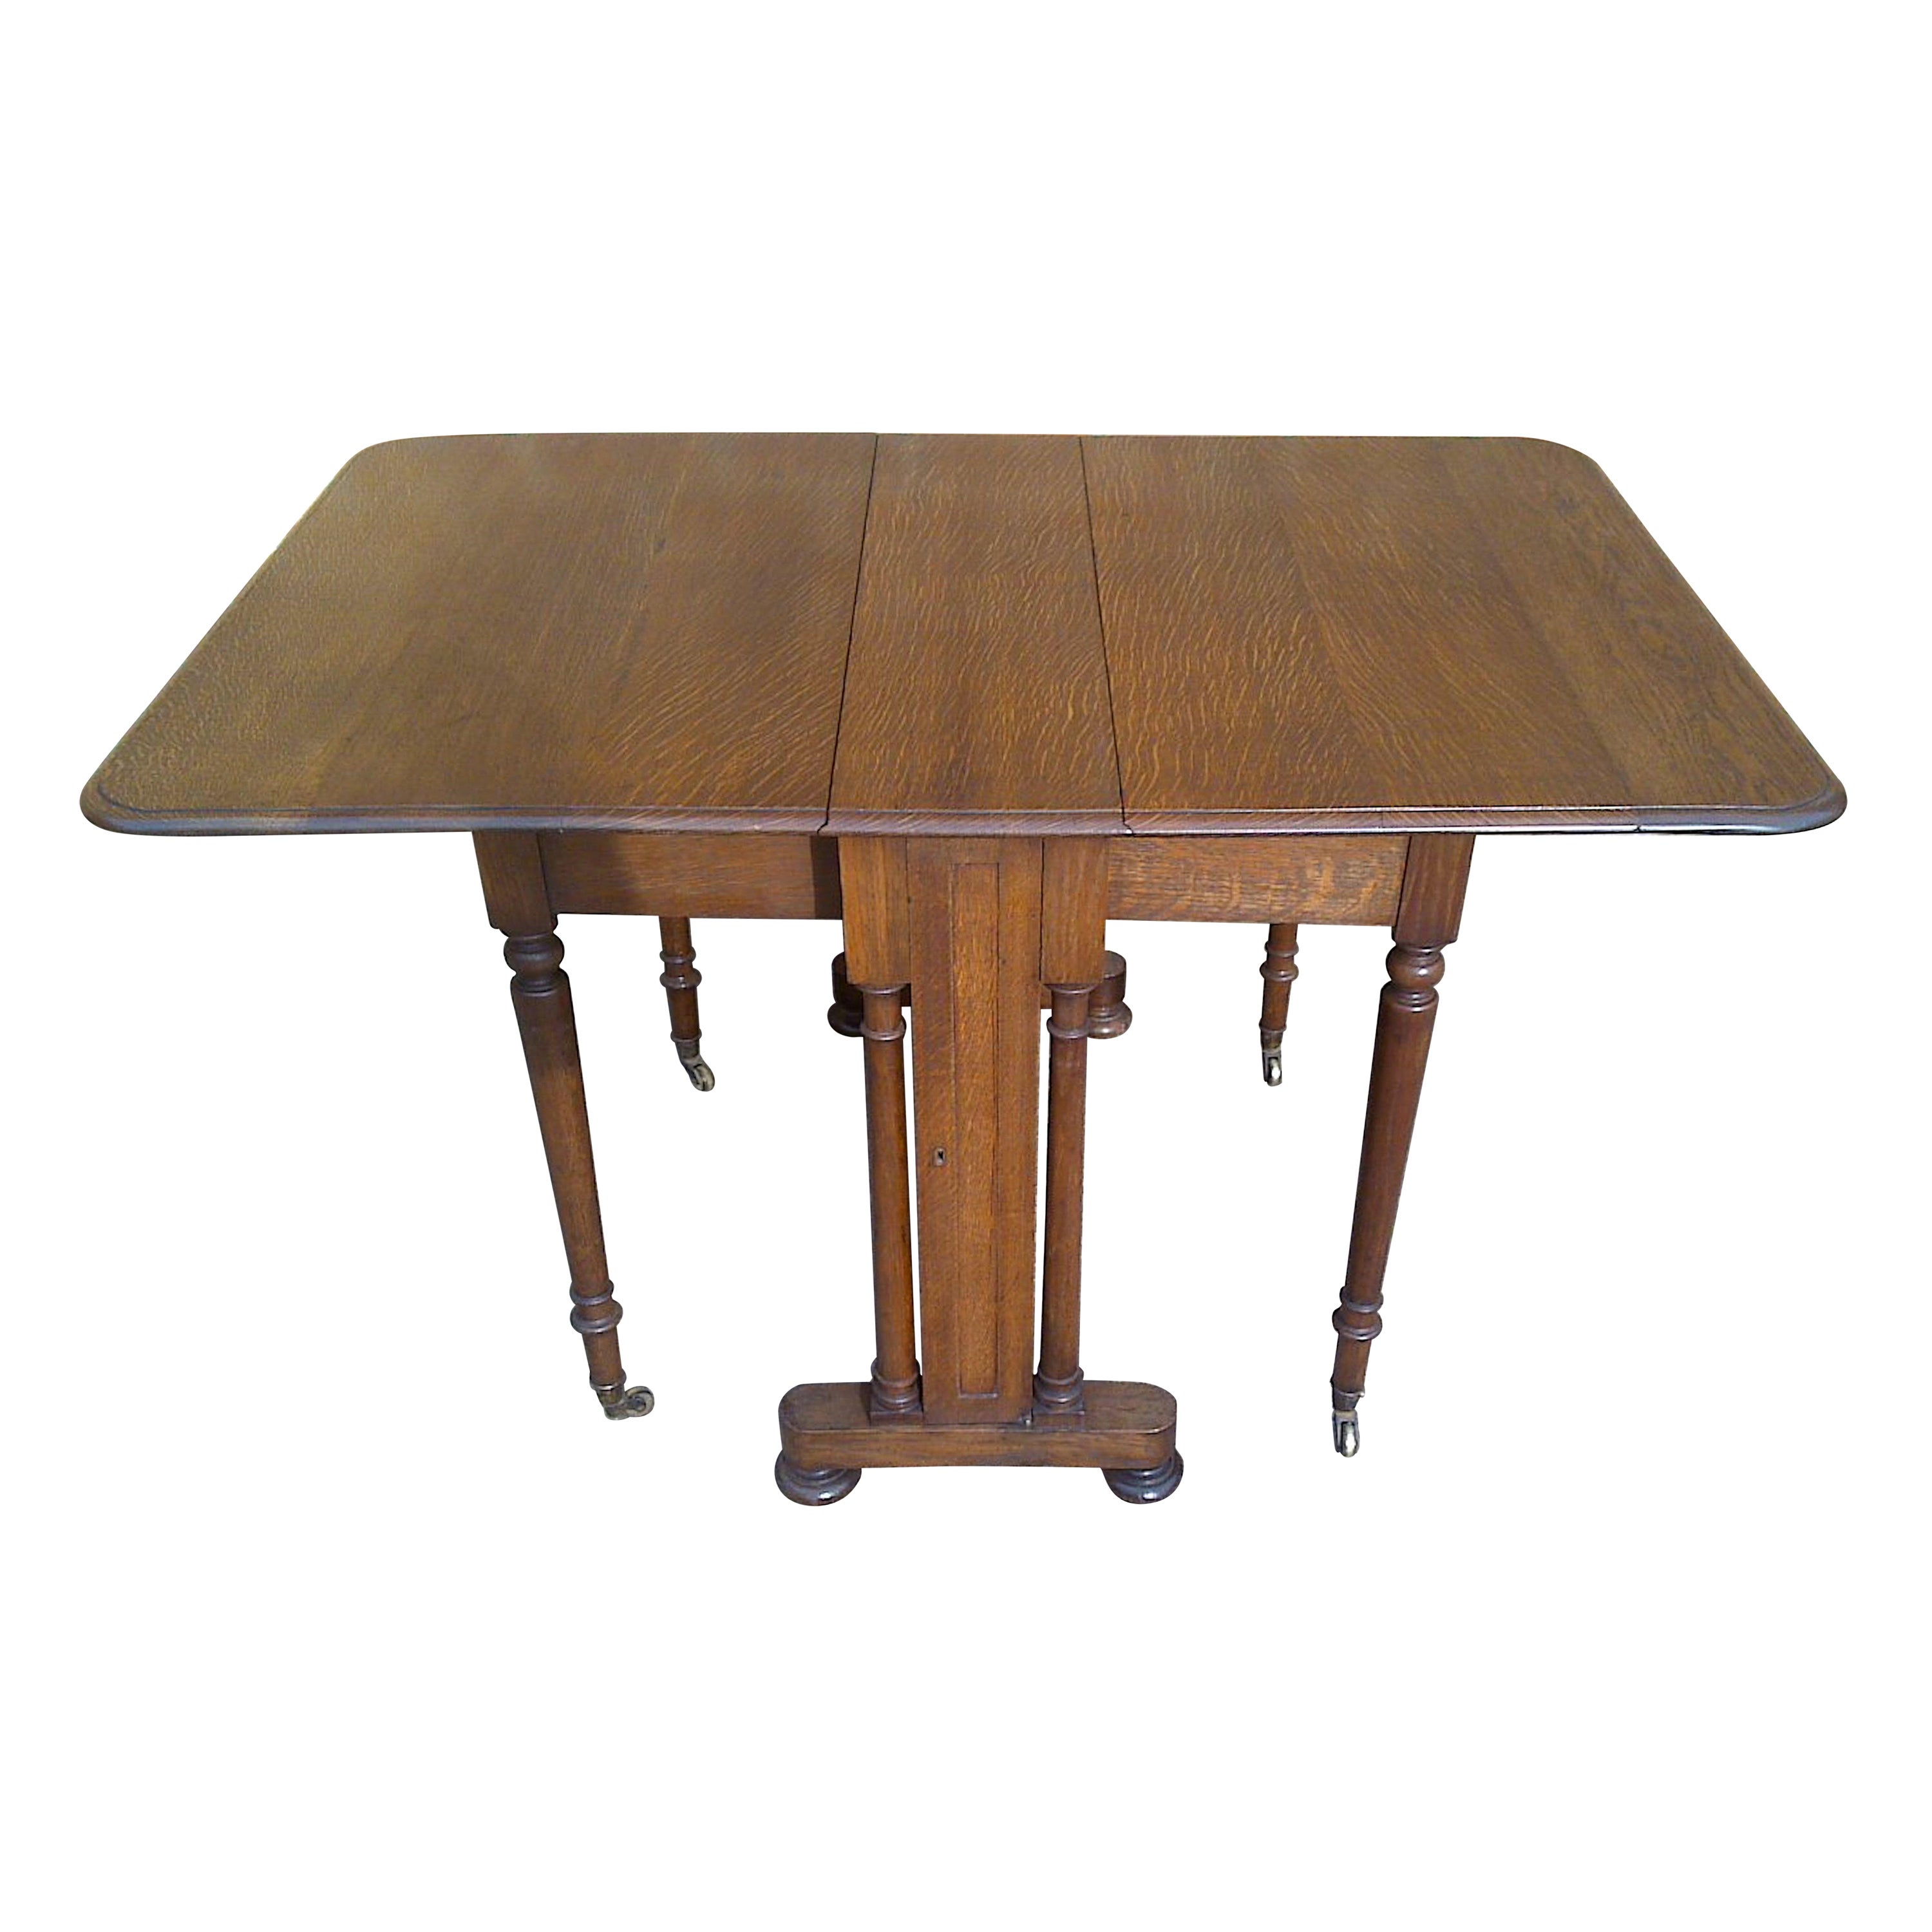 C Hindleys 134 Oxford St. London, a Quality Drop Leaf Victorian Oak Dining Table For Sale